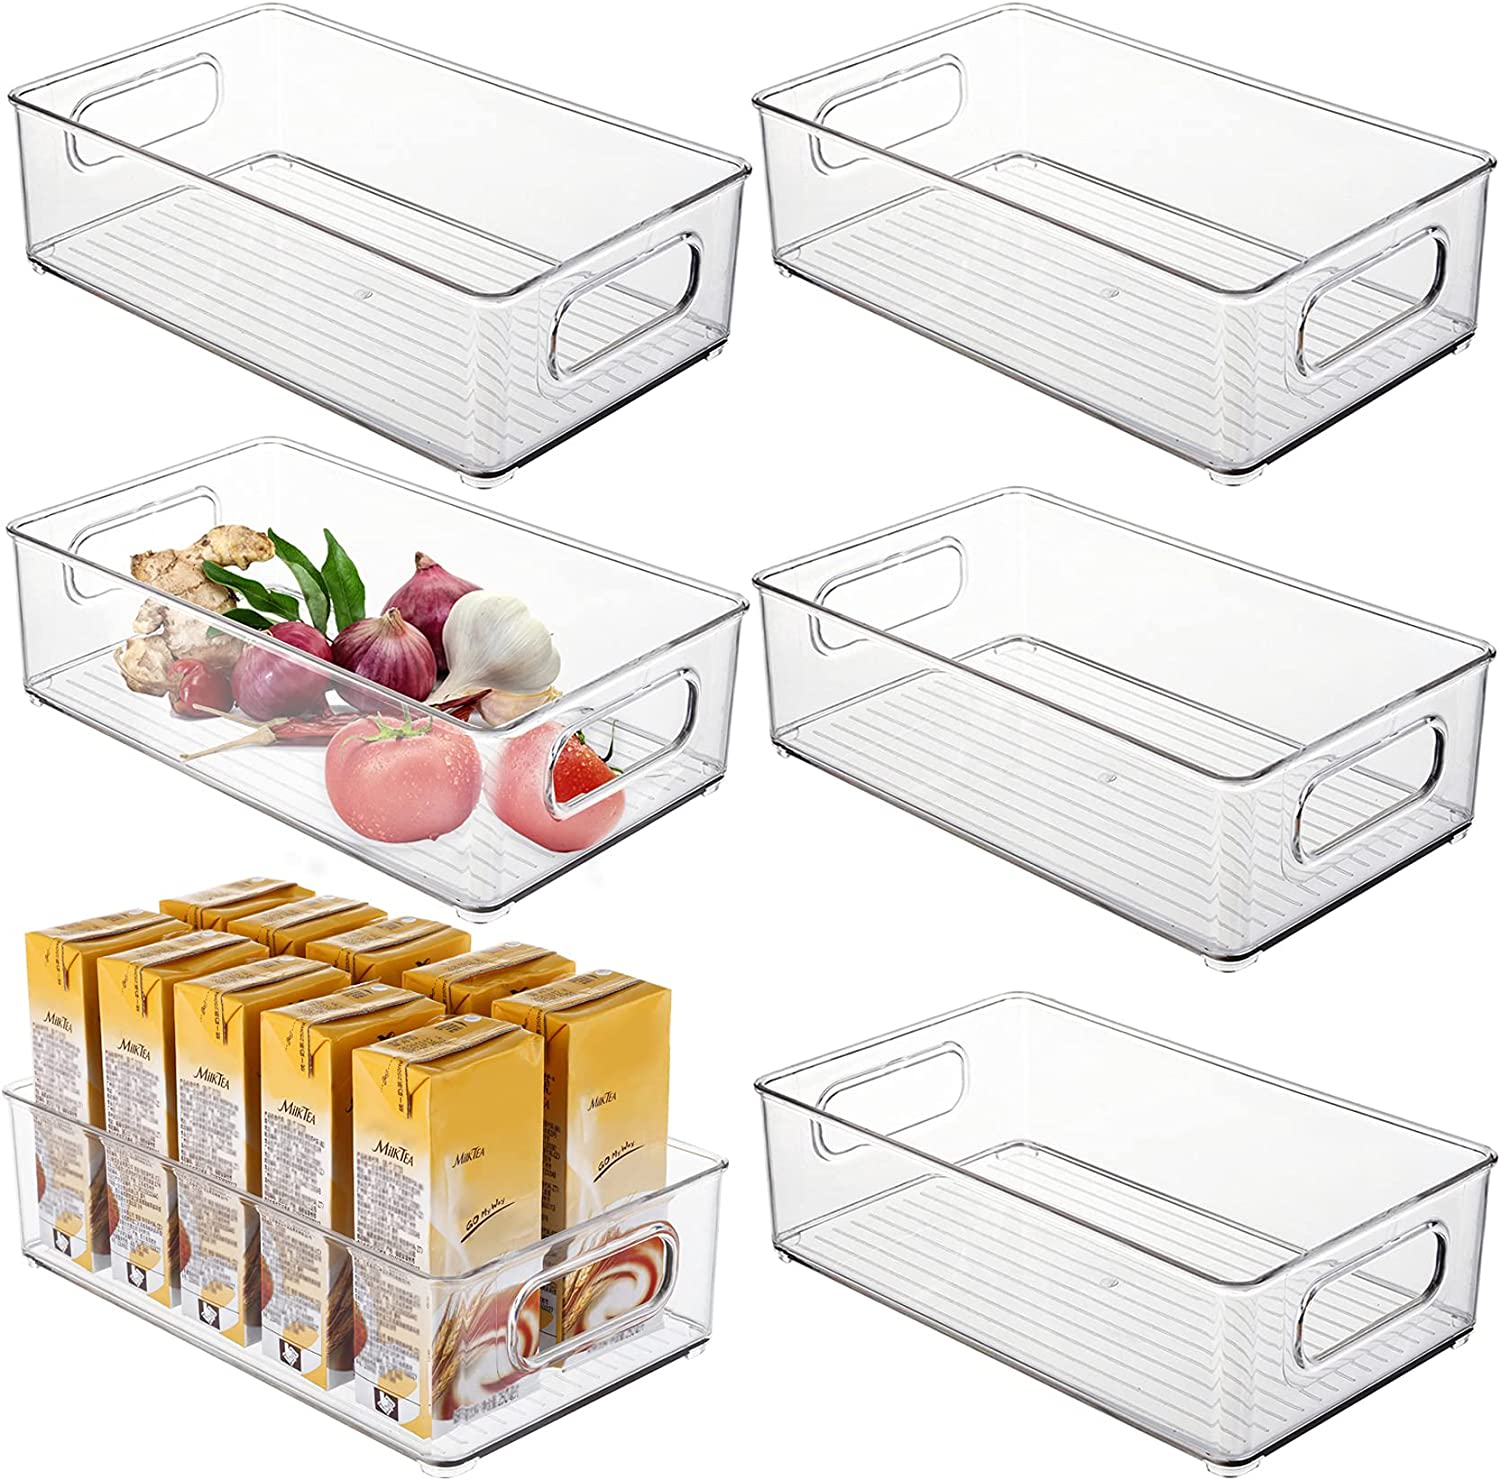 Kingrol 6 Pack Plastic Storage Bins -  Kitchen Products - Sorted and  Placed Professional Organizing